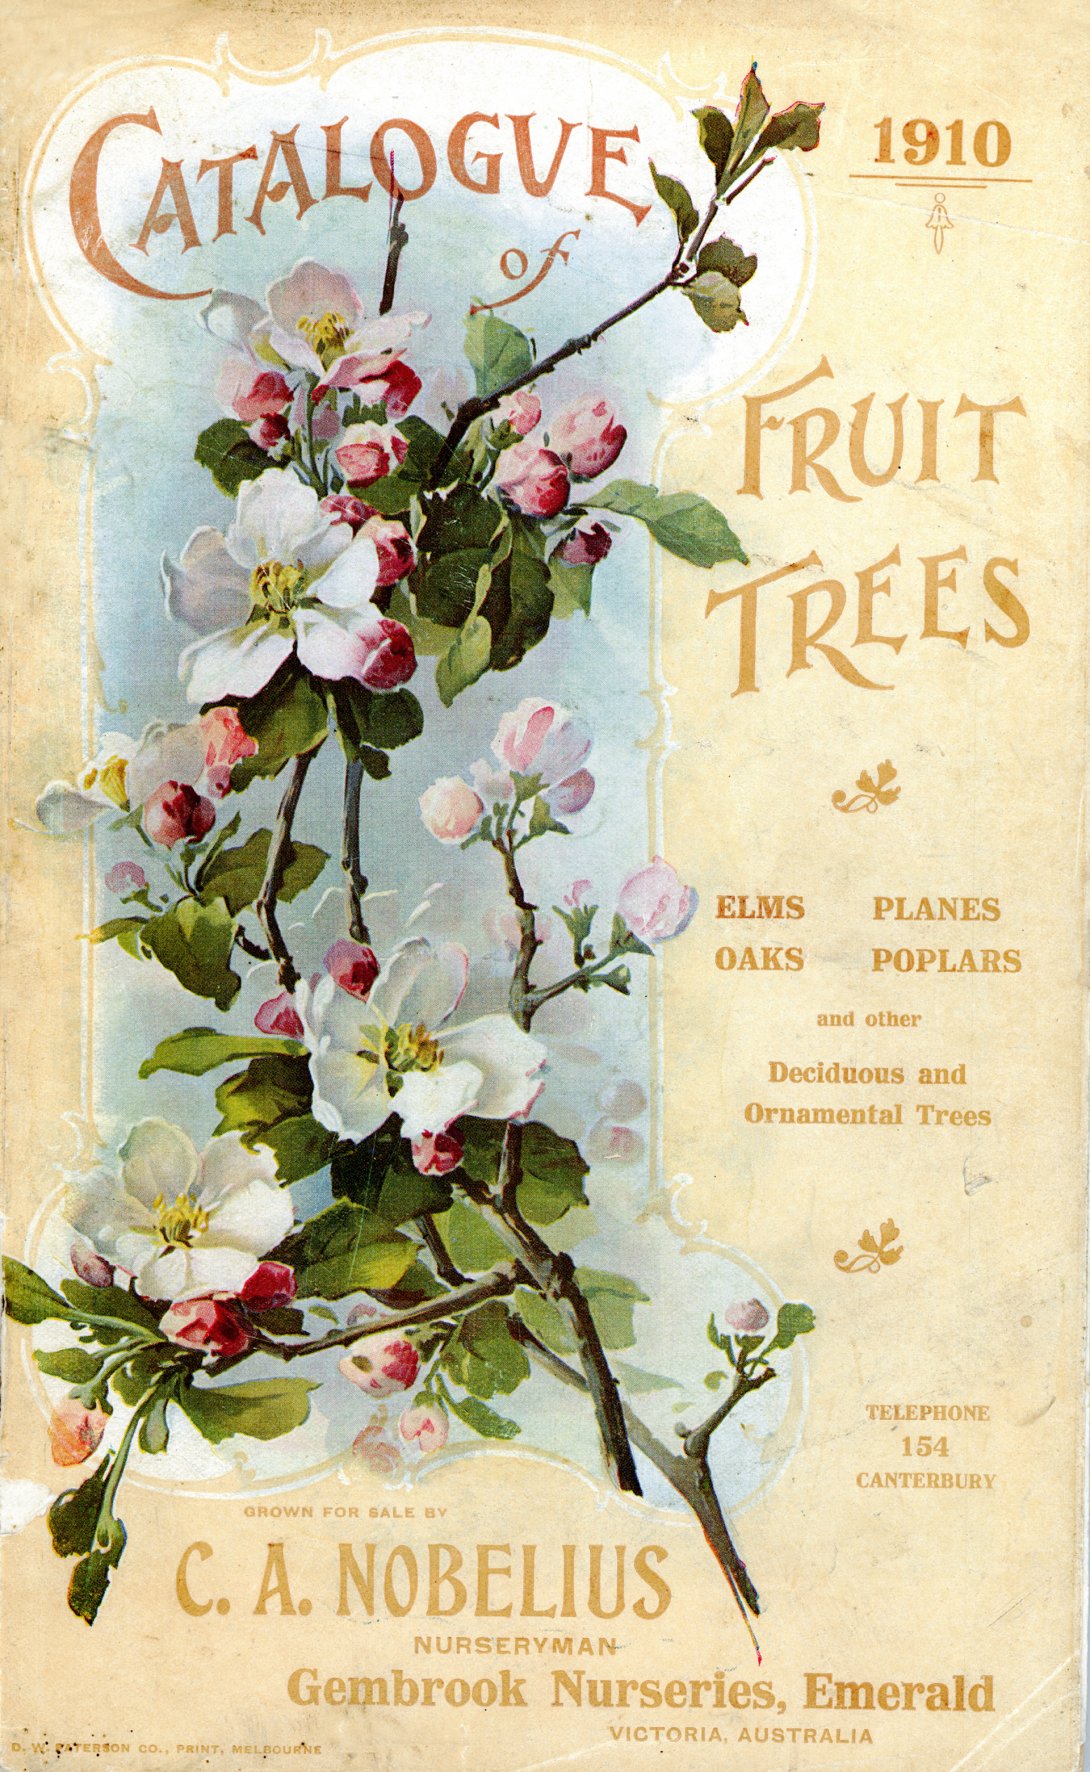 Artwork showing an illustration of a 'catalgove' tree branch with leaves and flowers